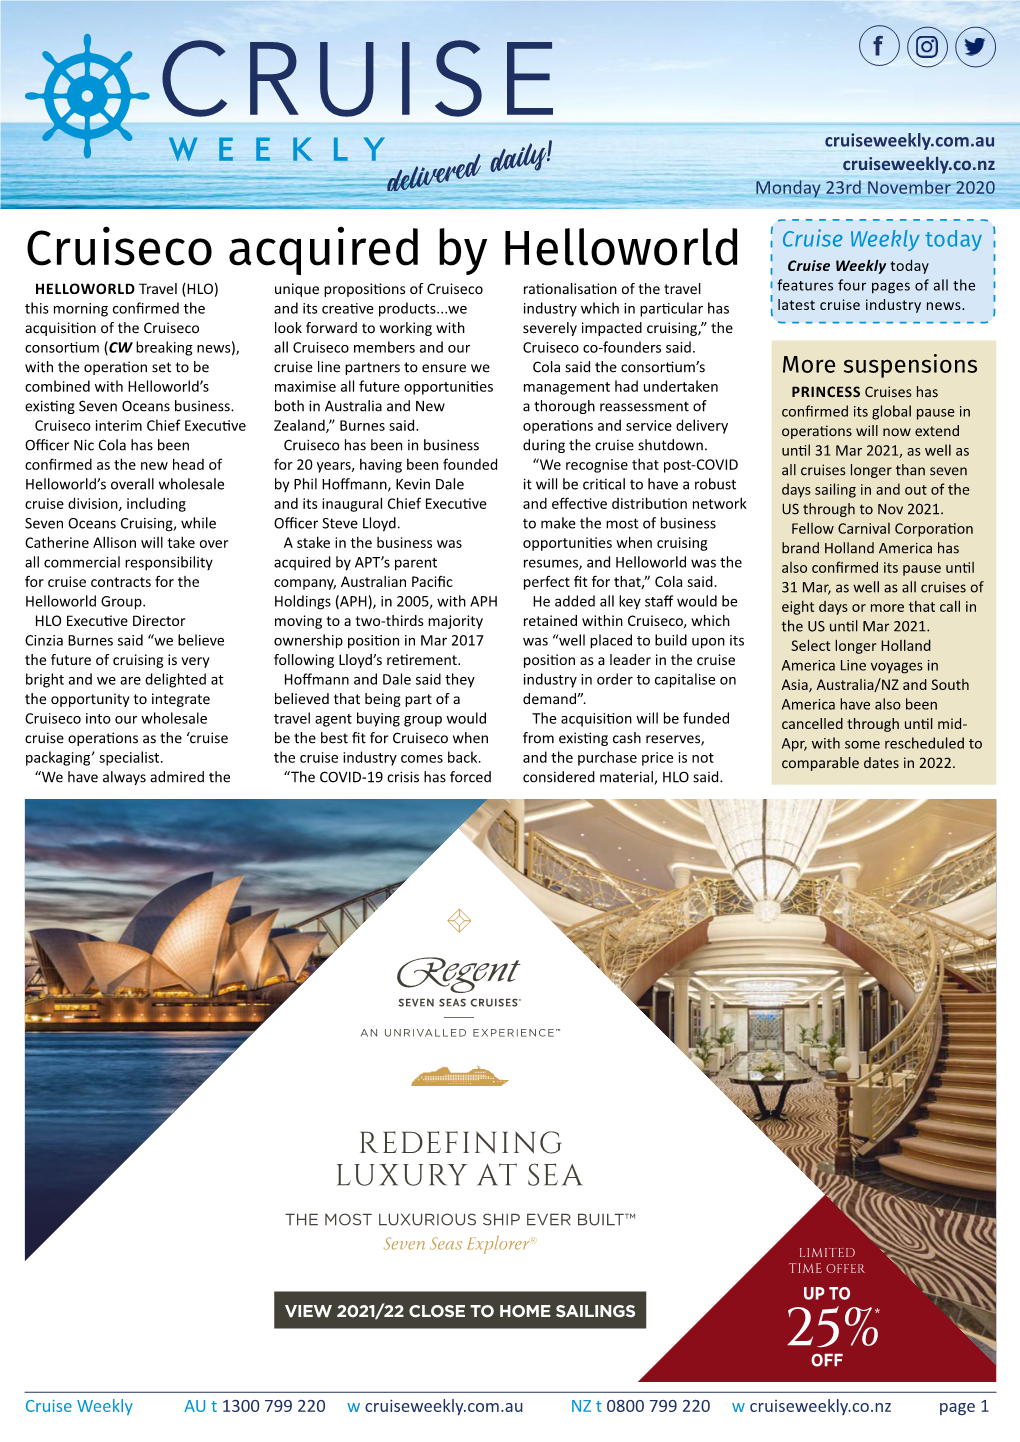 Cruiseco Acquired by Helloworld